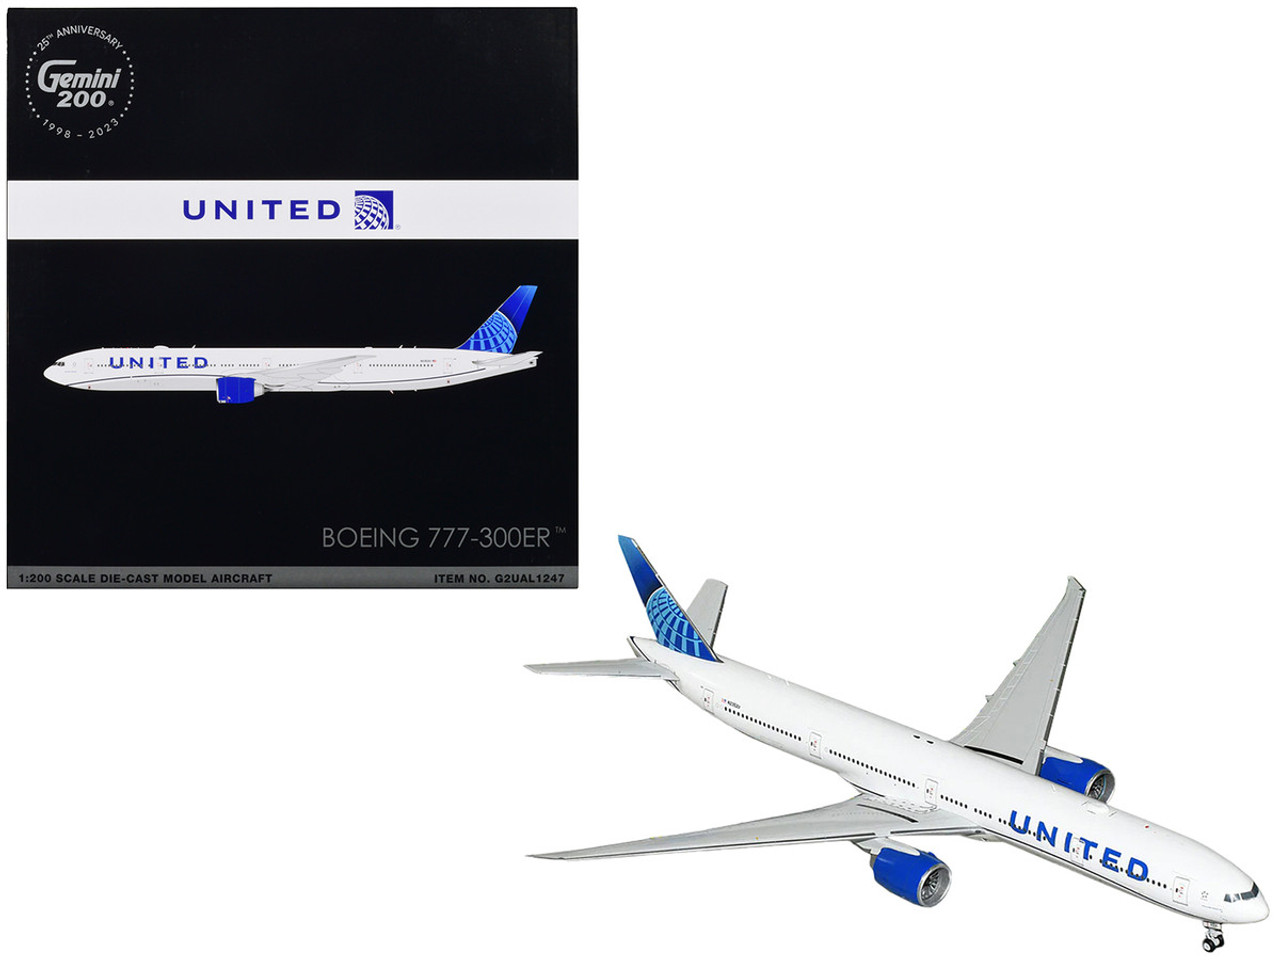 Boeing 777-300ER Commercial Aircraft "United Airlines" White with Blue Tail "Gemini 200" Series 1/200 Diecast Model Airplane by GeminiJets